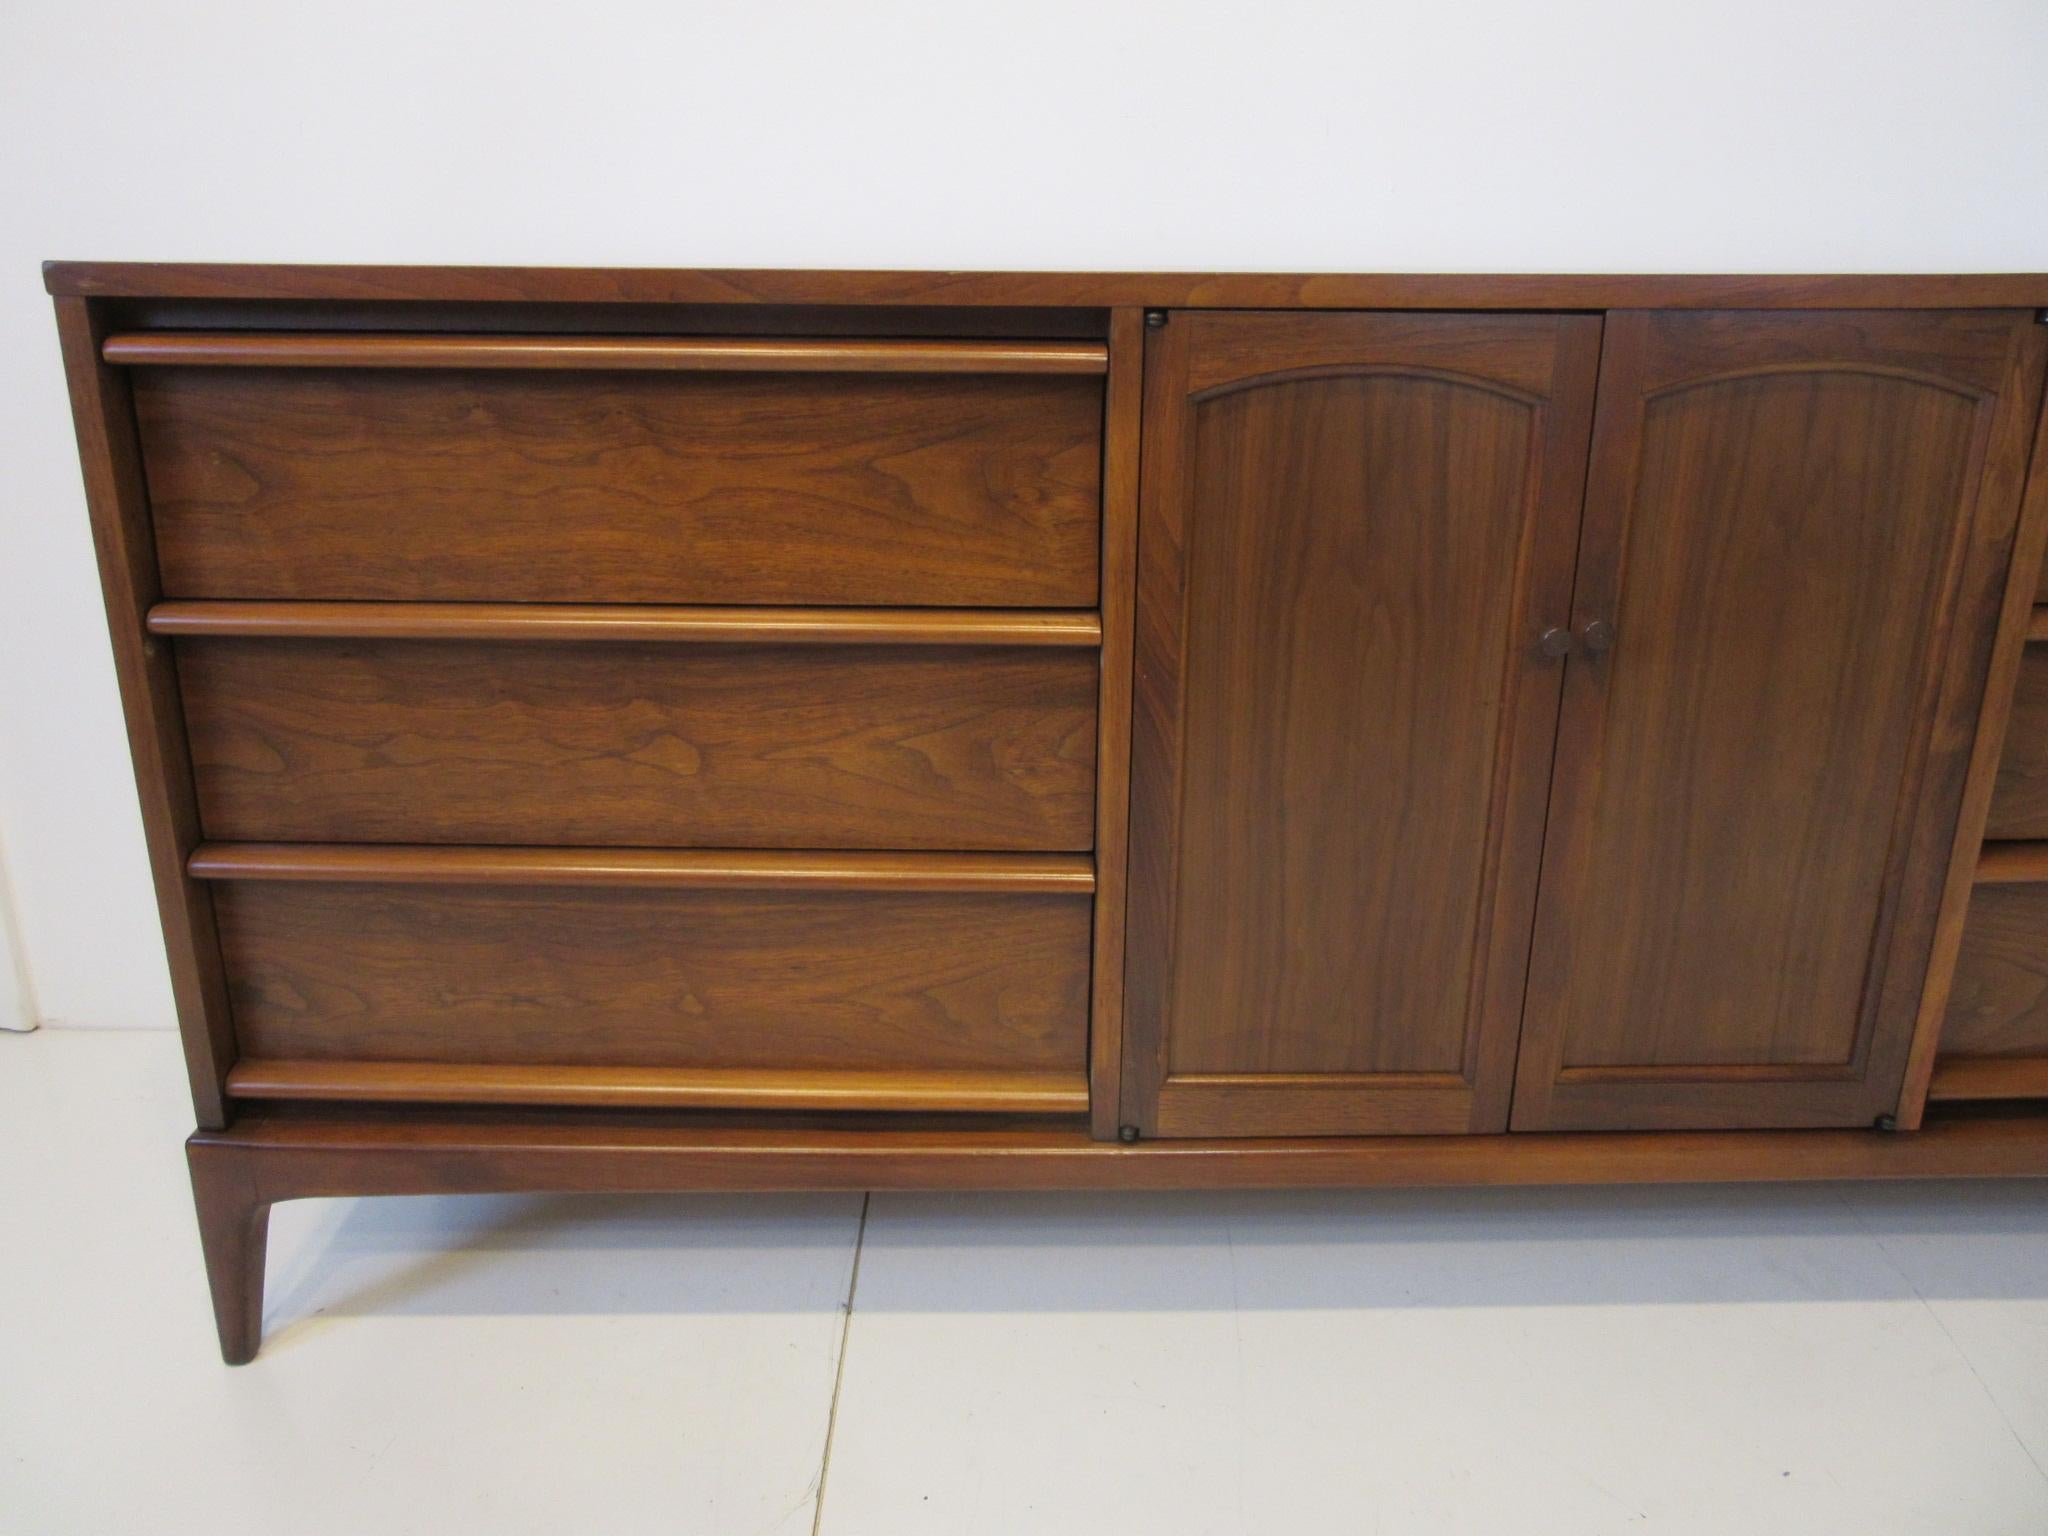 A walnut midcentury minimalist dresser with six drawers and two doors revealing three additional drawers. The doors have reversible panels in matching walnut or the other side having woven caning all sitting on beautifully crafted slender legs for a